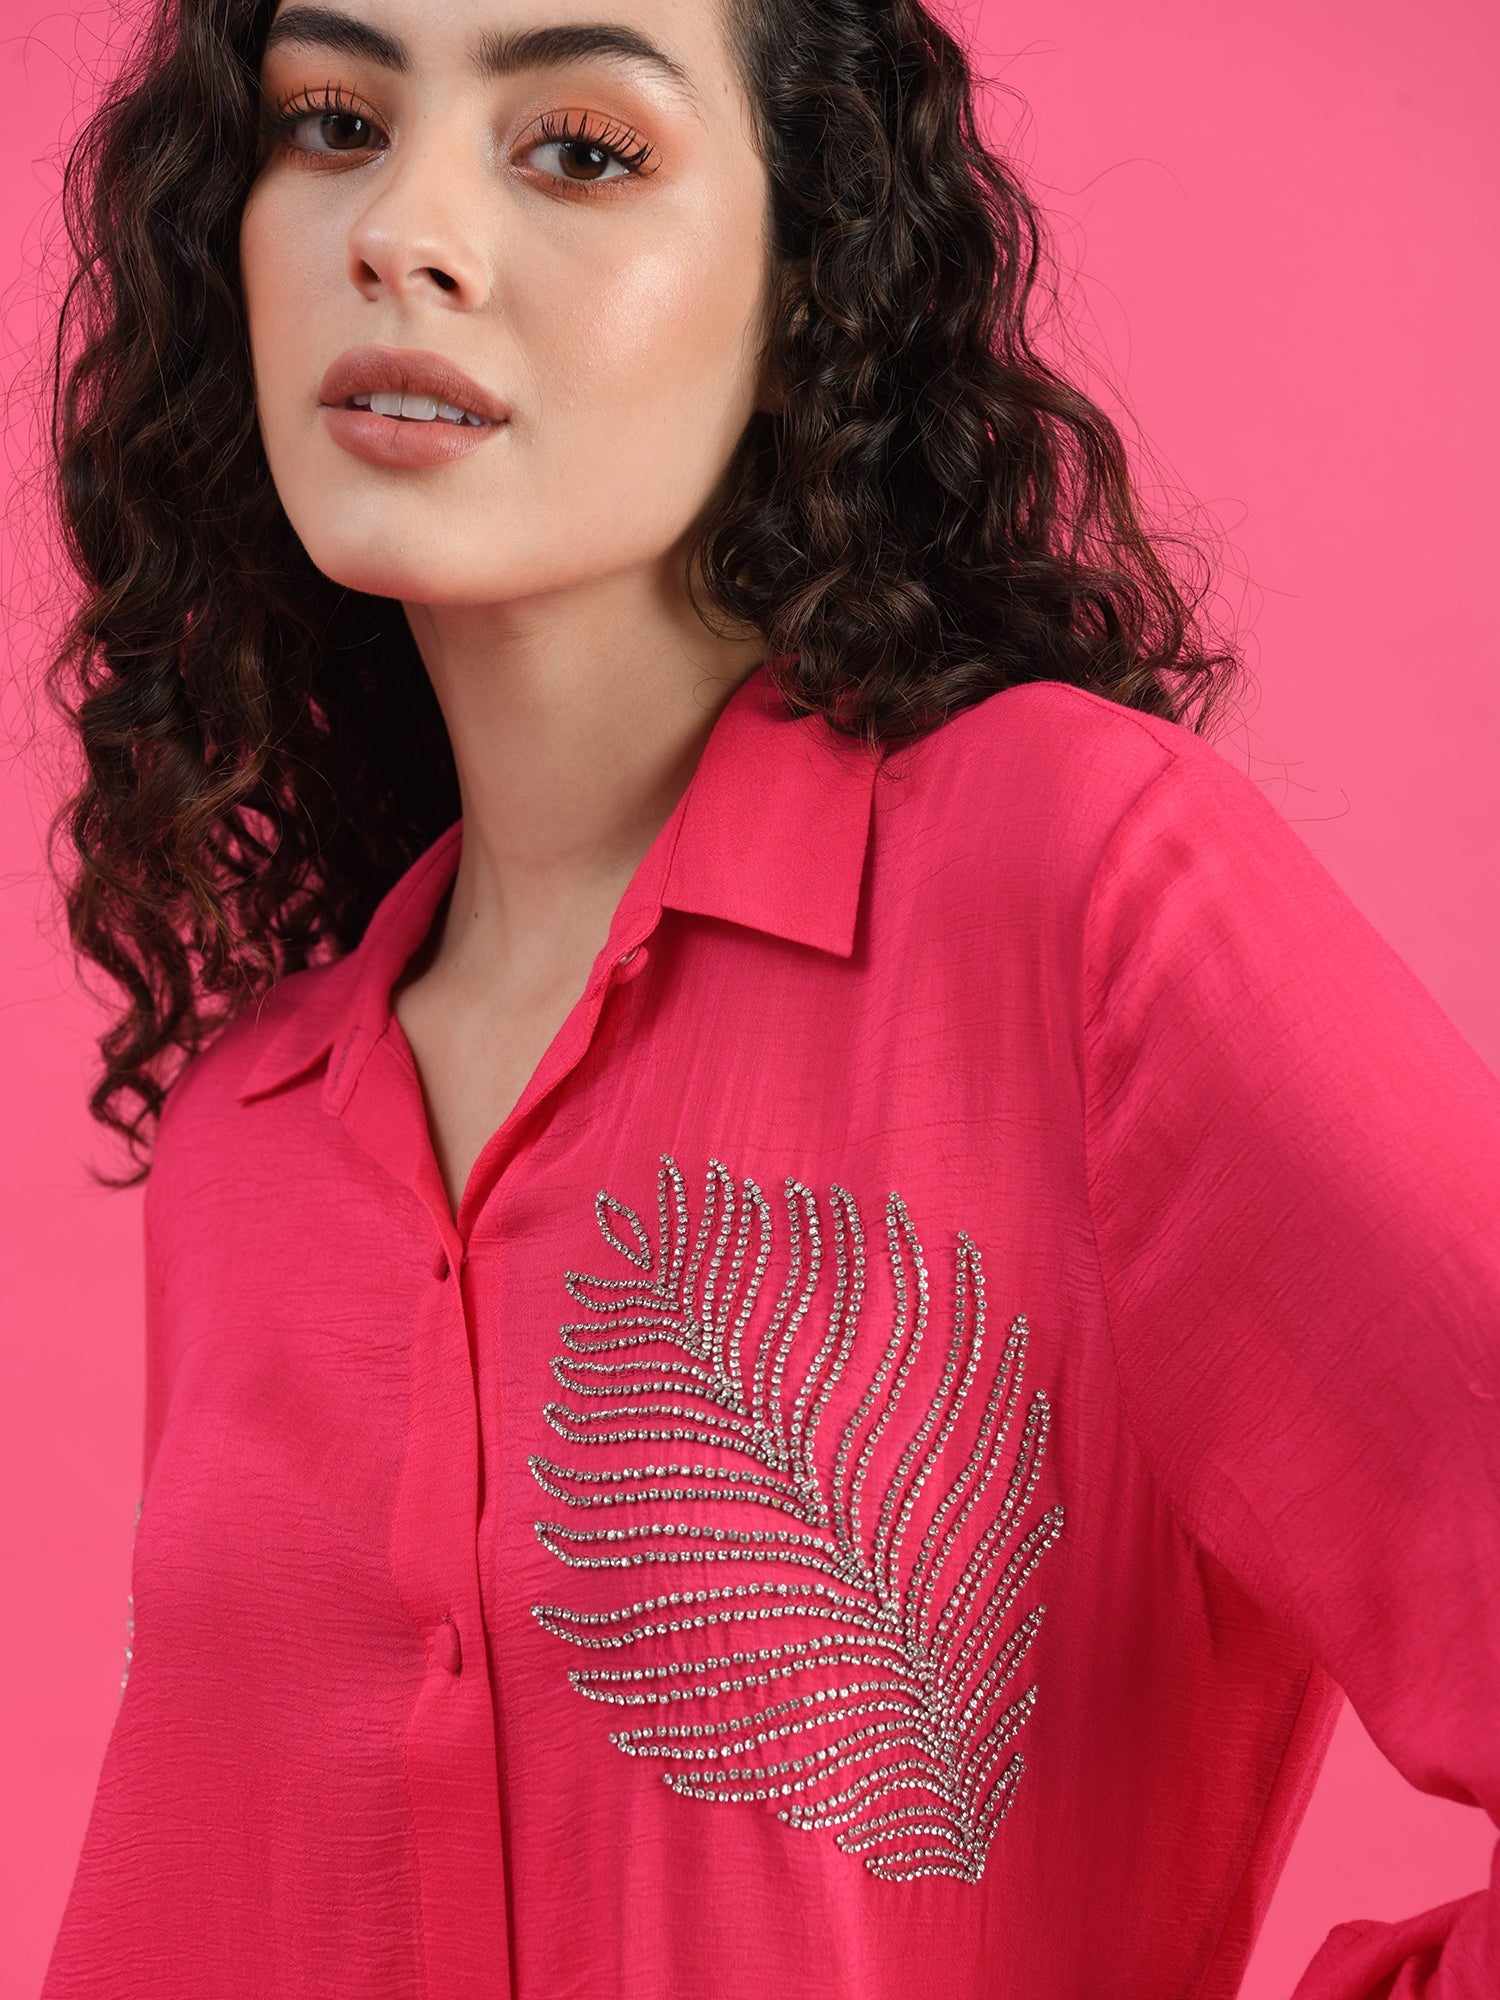 attic curves deluxe embellished fuchsia pink shirt